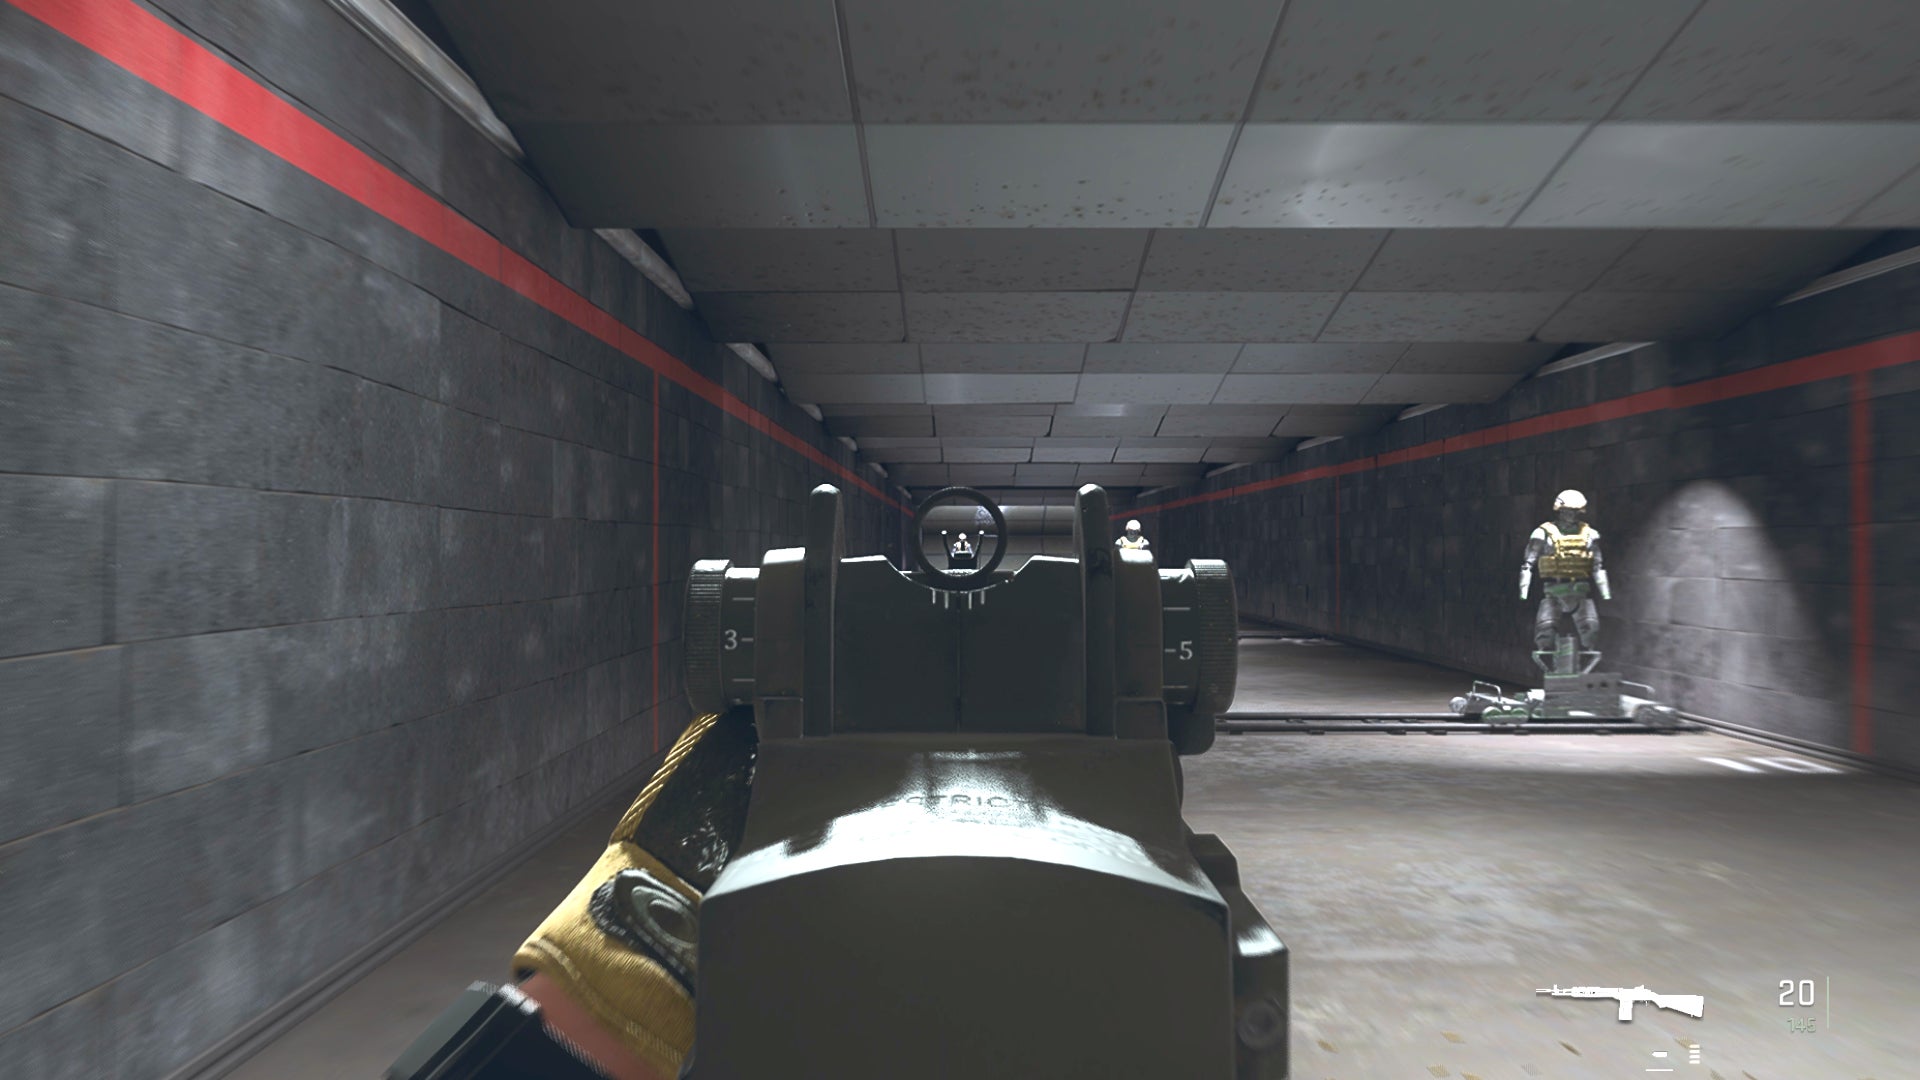 The player in Warzone 2.0 aims at a training dummy with the S0-14 ironsights.